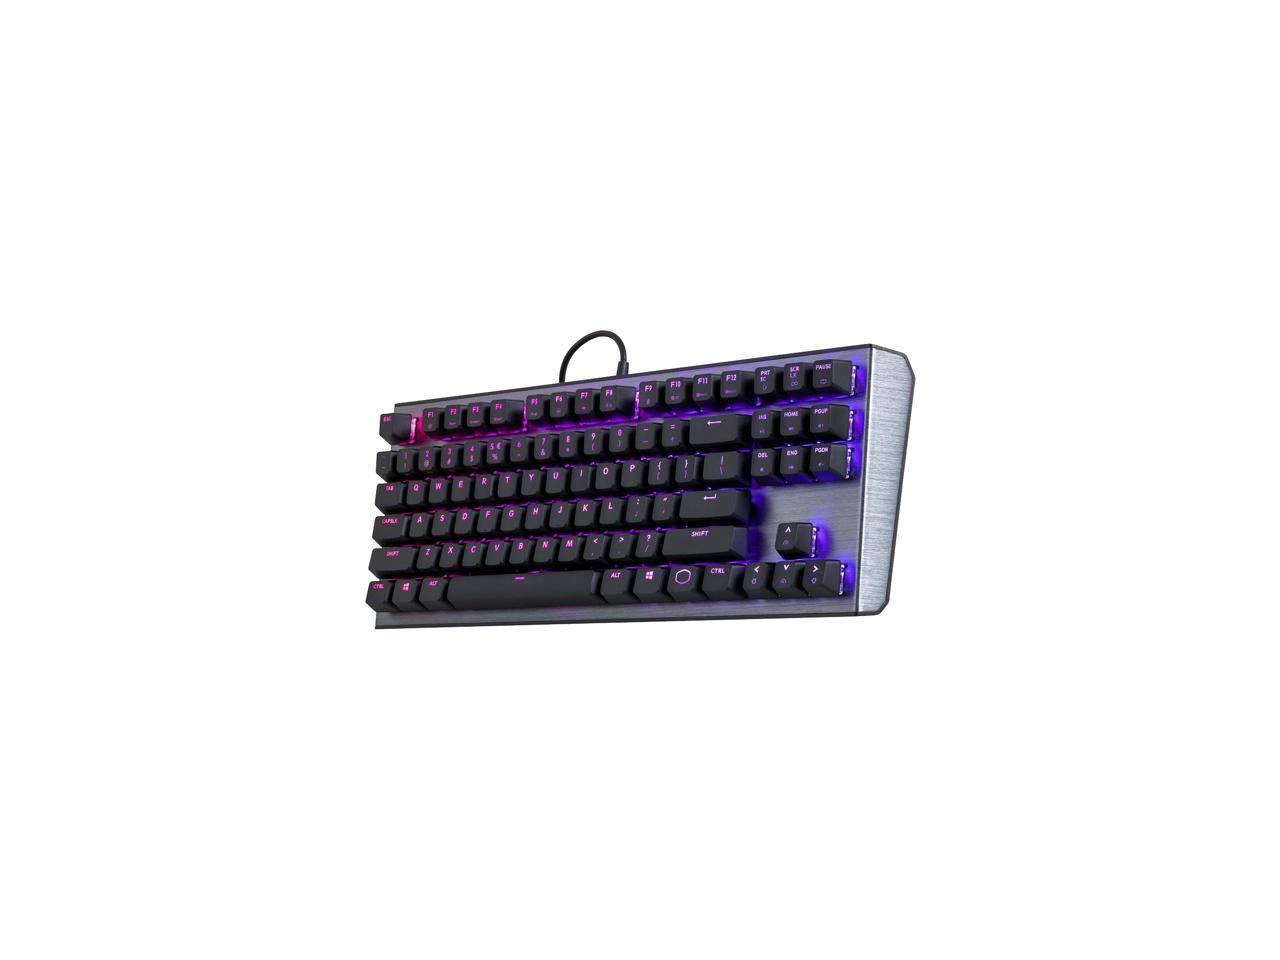 Cooler Master CK530 Tenkeyless Gaming Mechanical Keyboard with Blue Switches, RGB Backlighting, On-the-Fly Controls, and Aluminum Top Plate